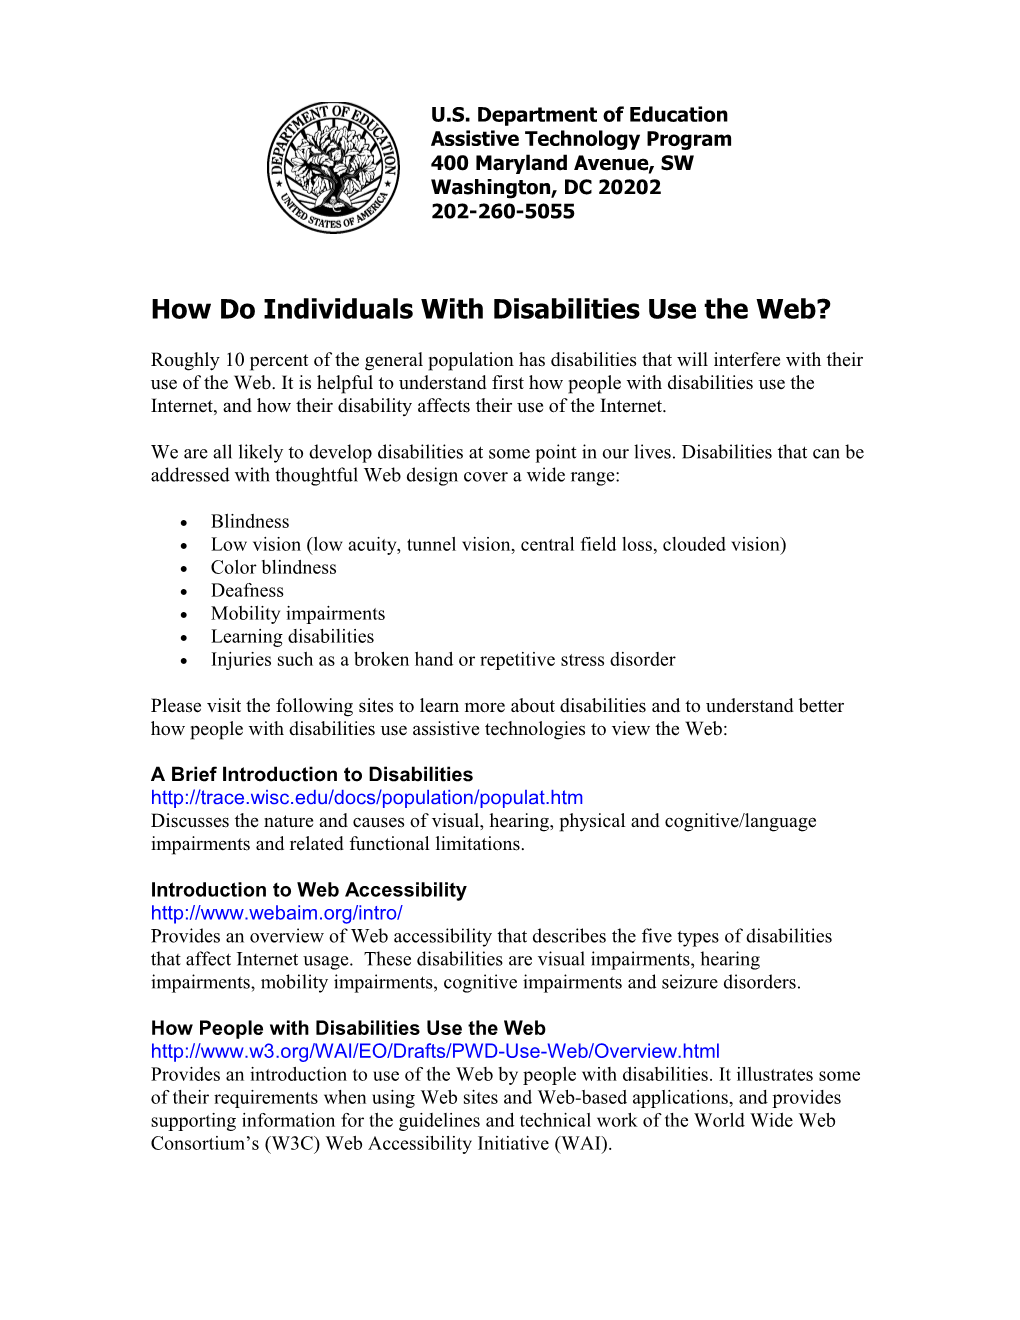 How Do Individuals with Disabilities Use the Web? (MS Word)